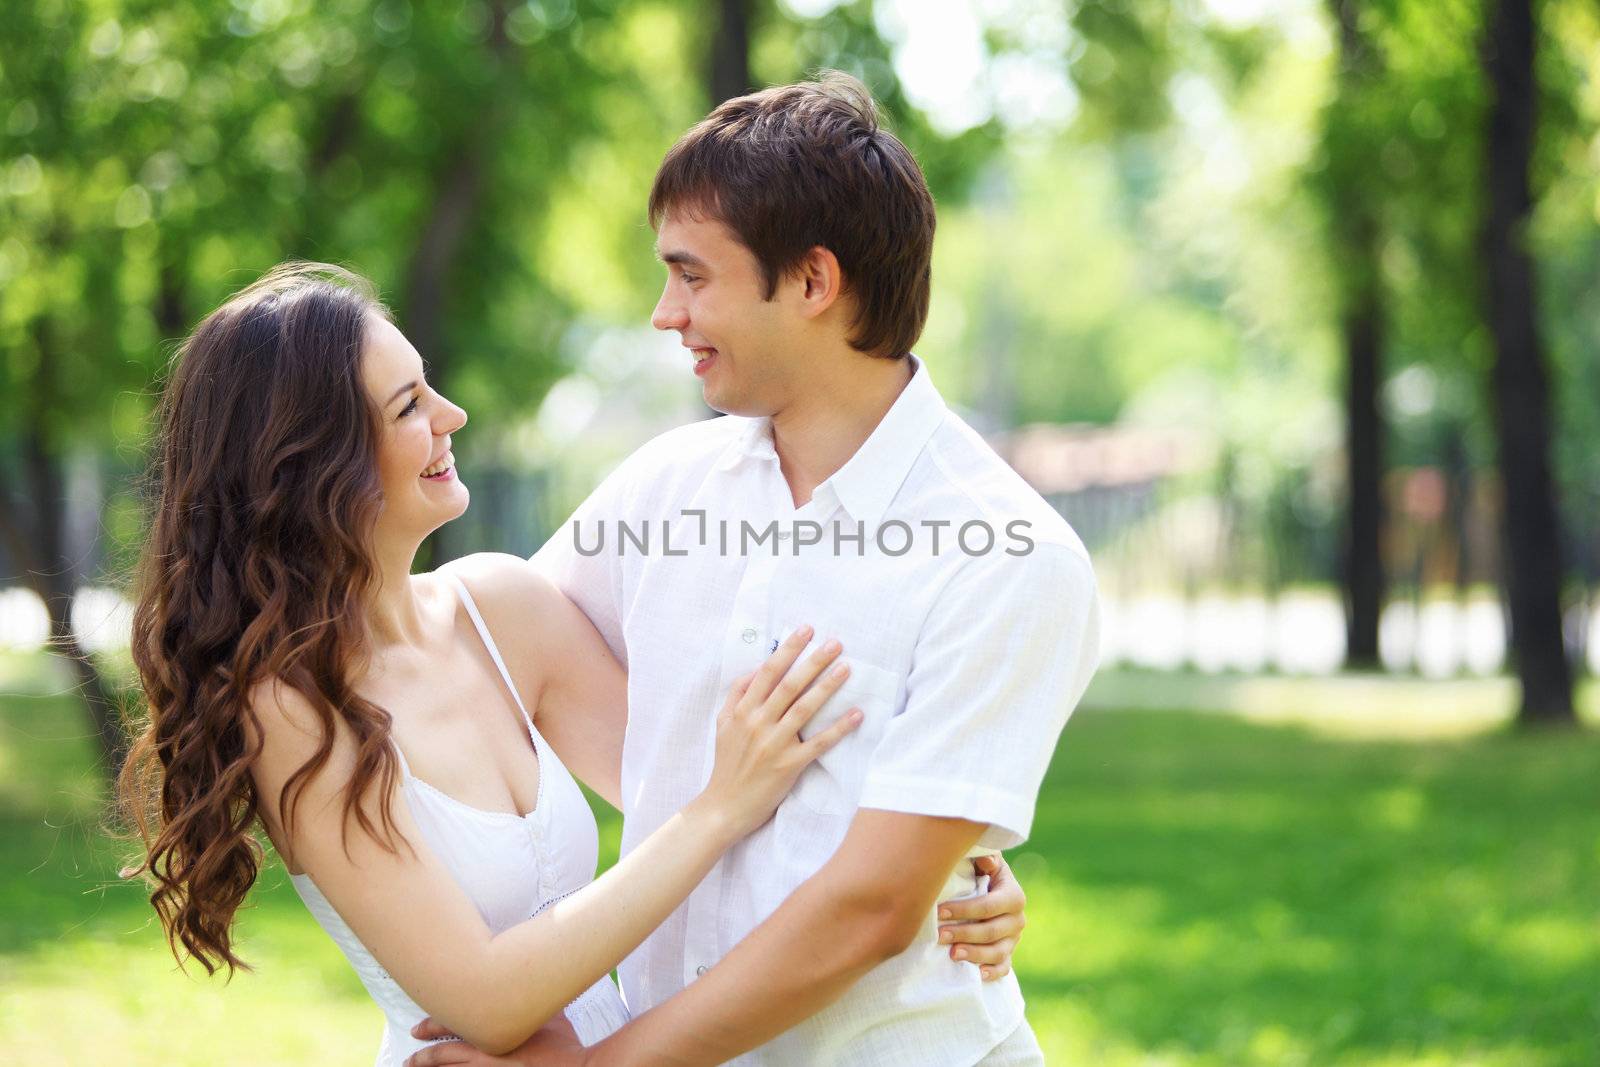 Portrait of a young romantic couple embracing each other